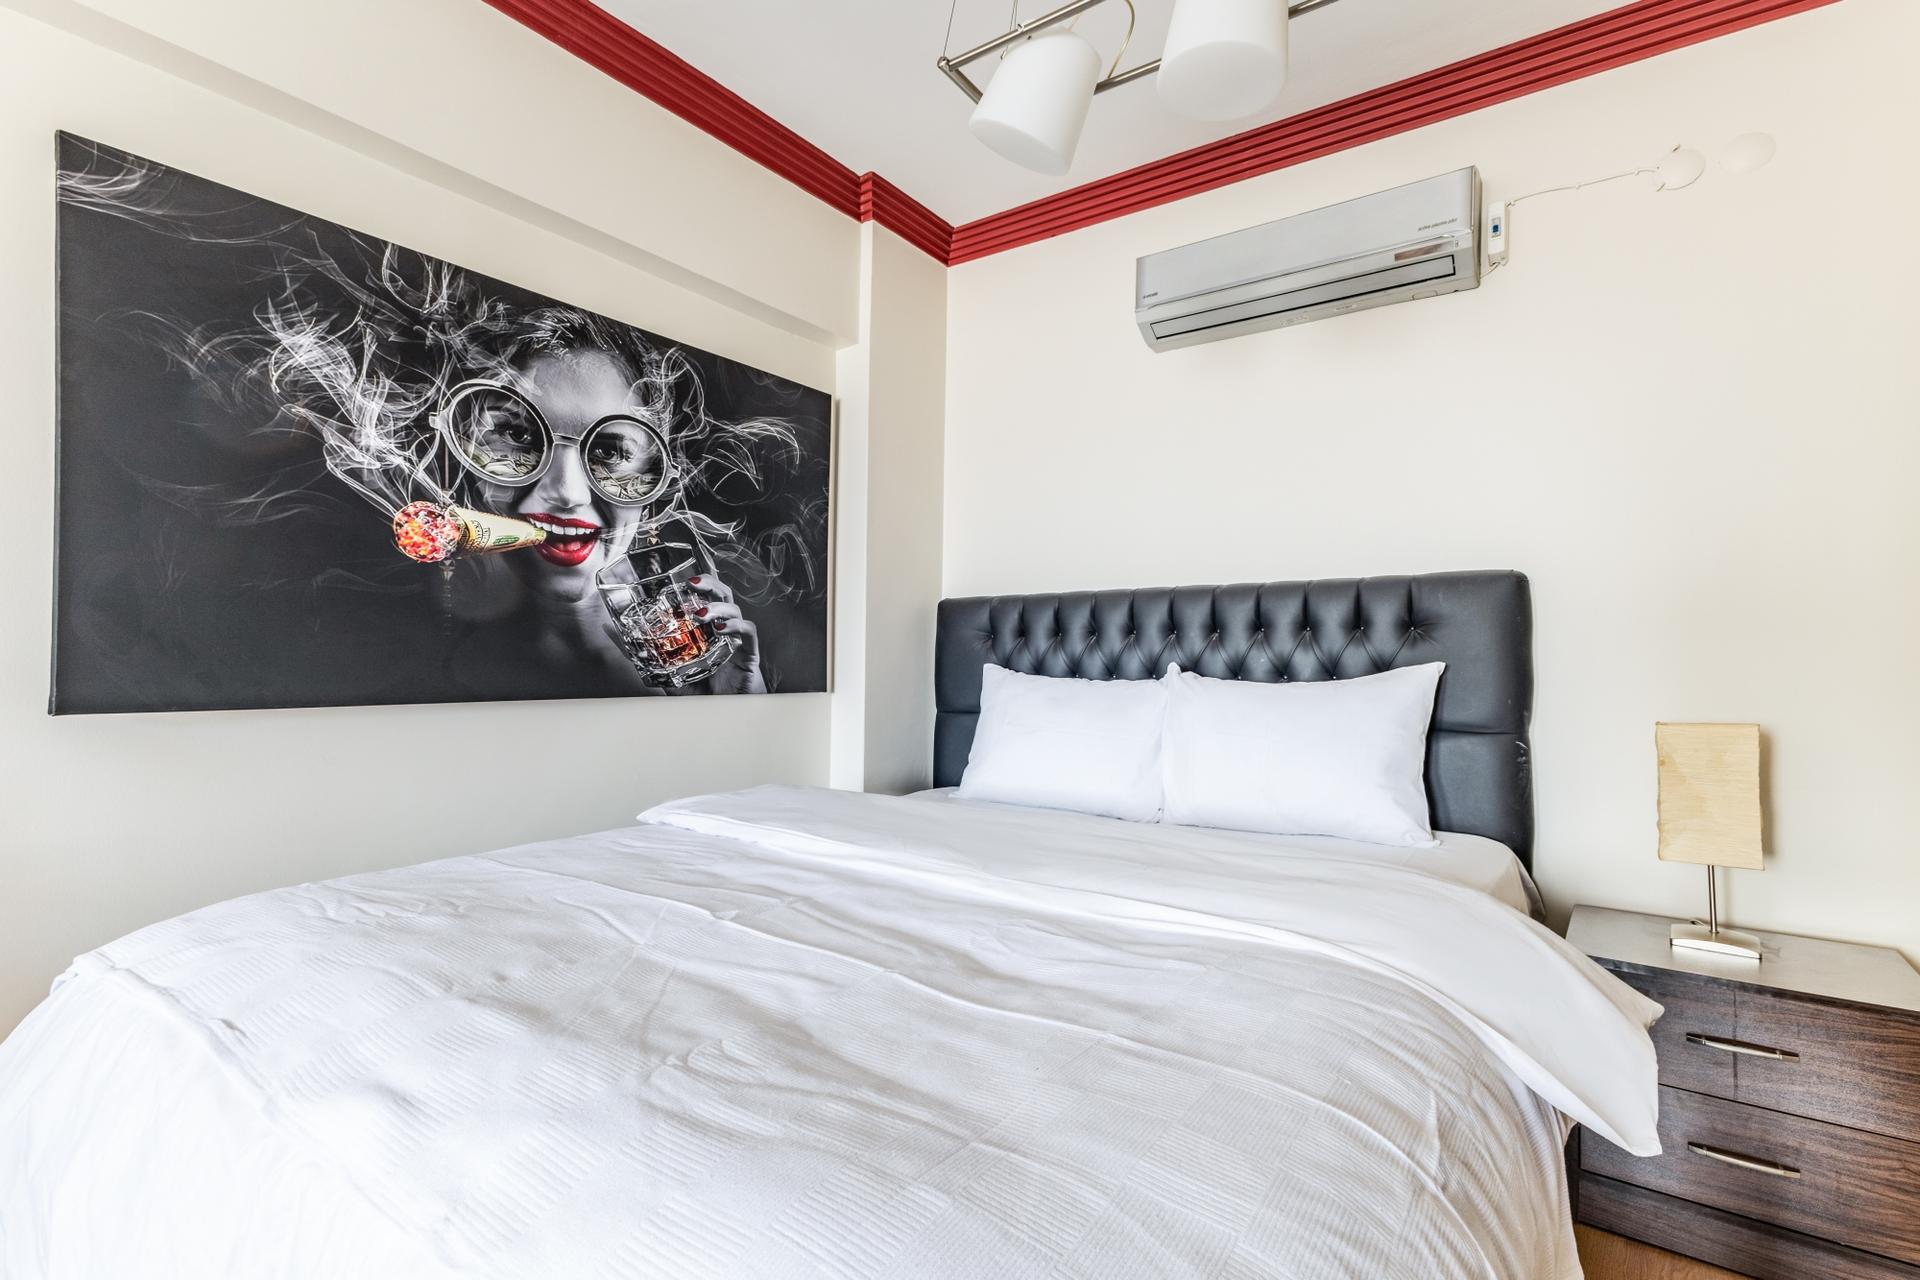 The bedroom is immaculate, with a freshly made bed and pristine surfaces that create a welcoming and relaxing atmosphere.